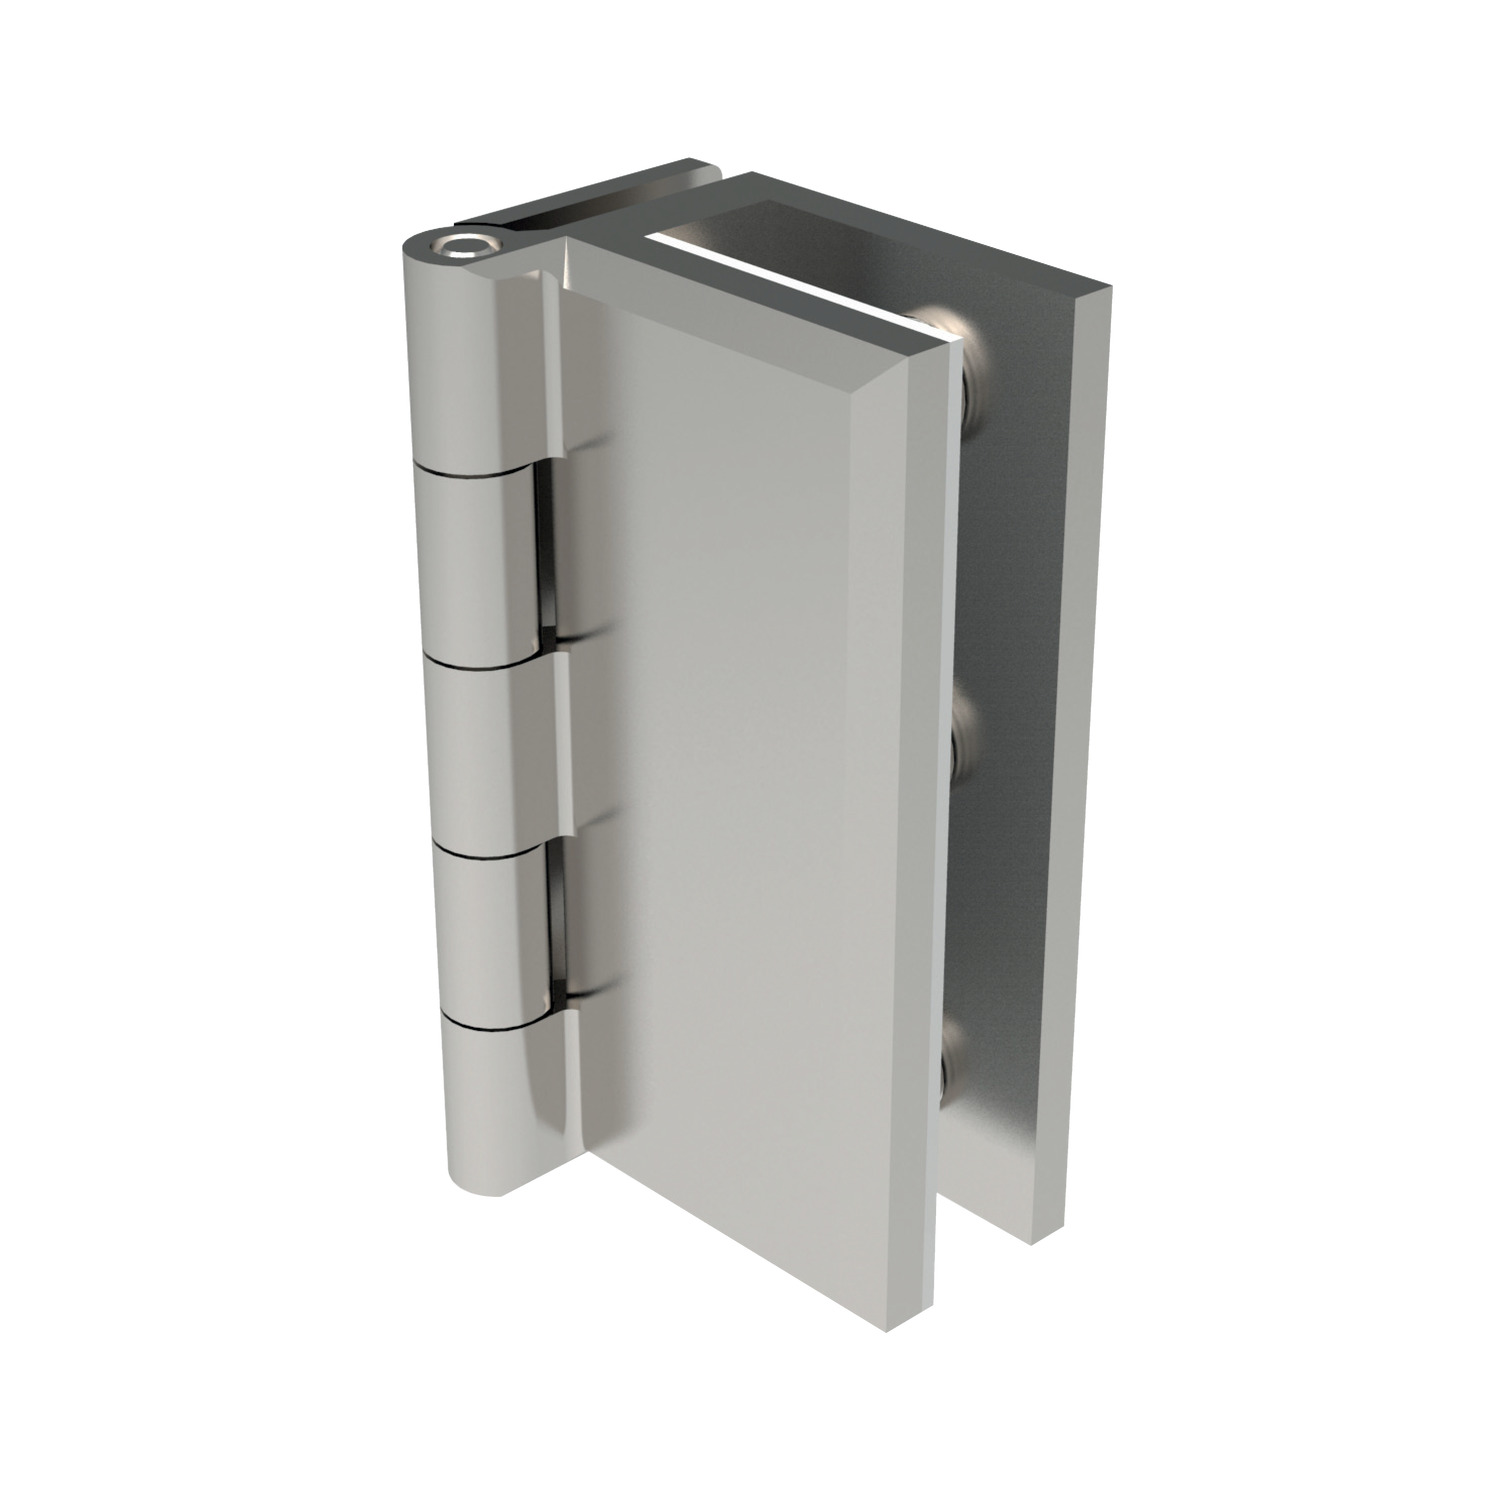 Glass Door Hinges - Set Screw Mount Stainless steel hinges designed for mounting via 3 grub screws. No holes in the glass surface required for installation.